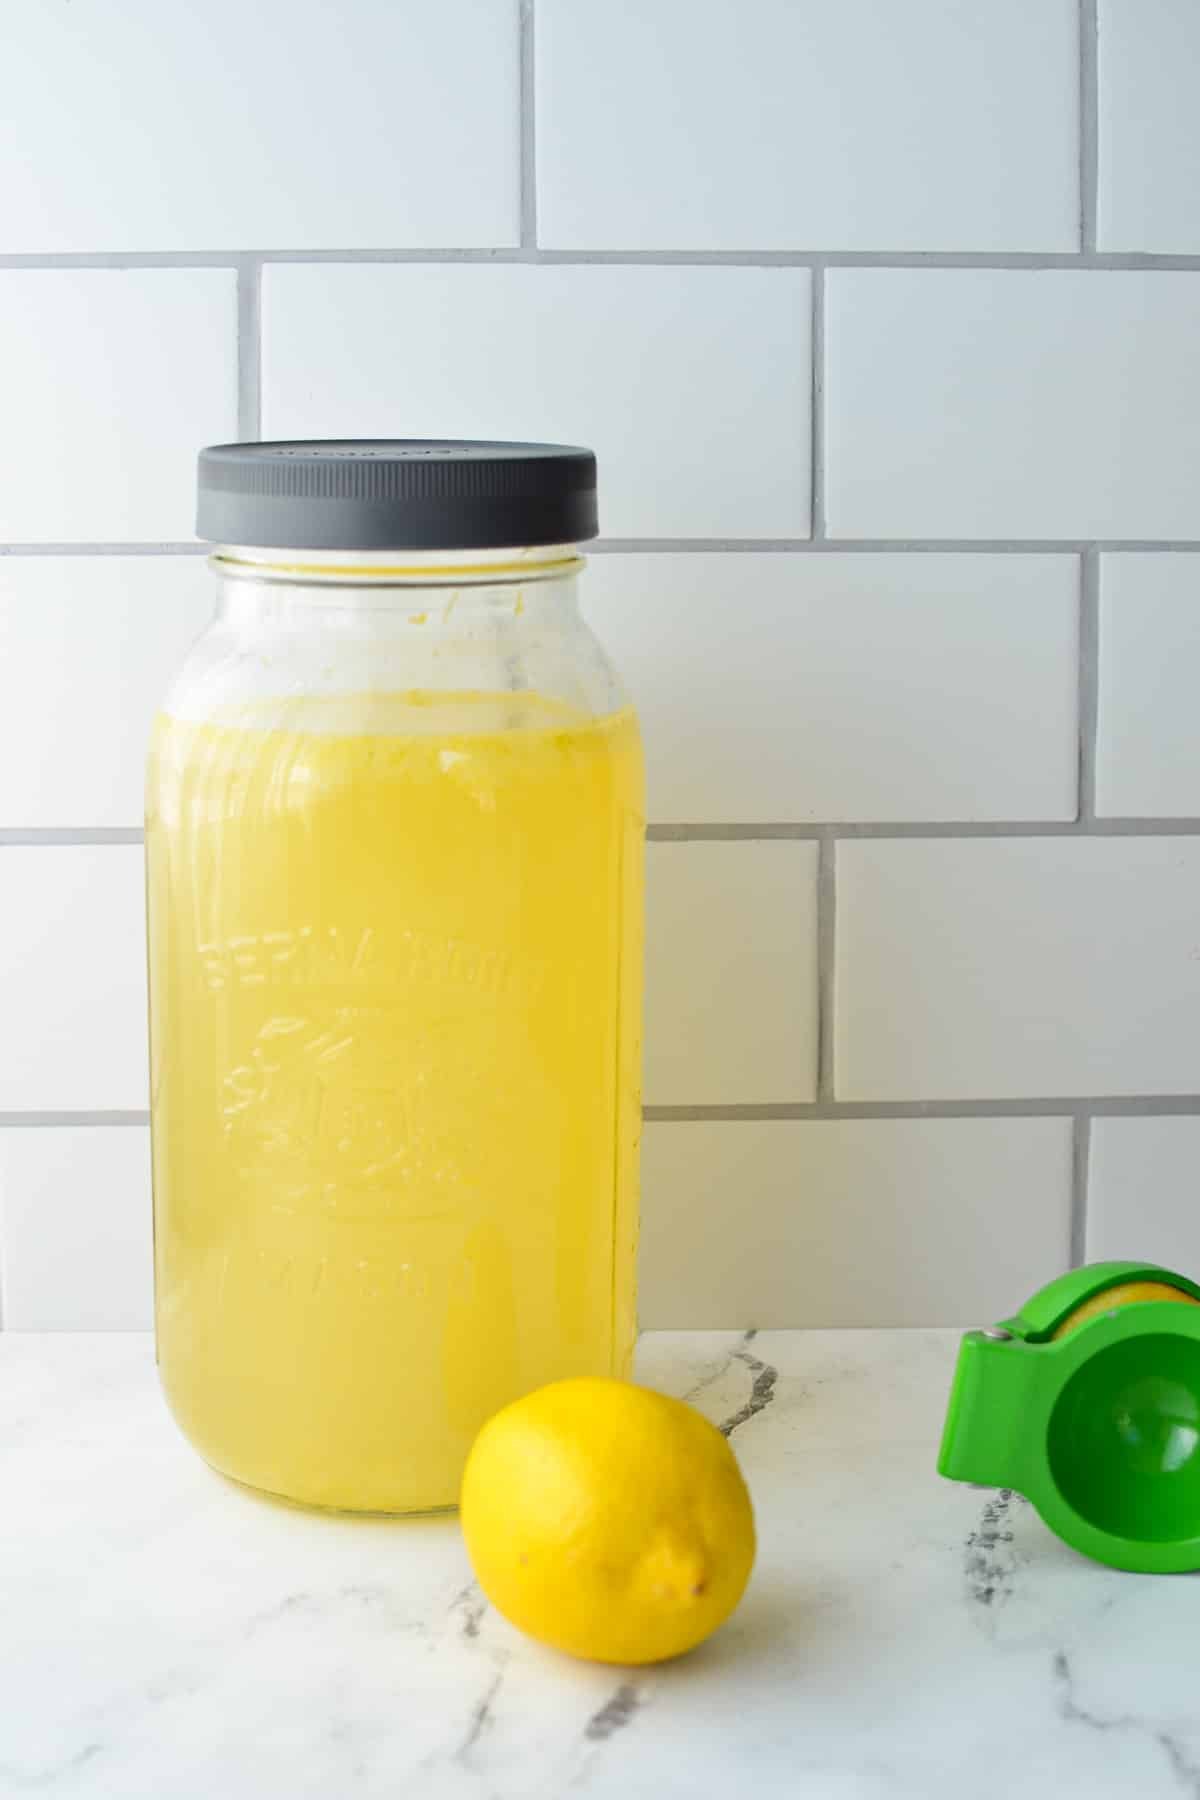 A half gallon mason jar of lemon and ginger water resting on a counter.